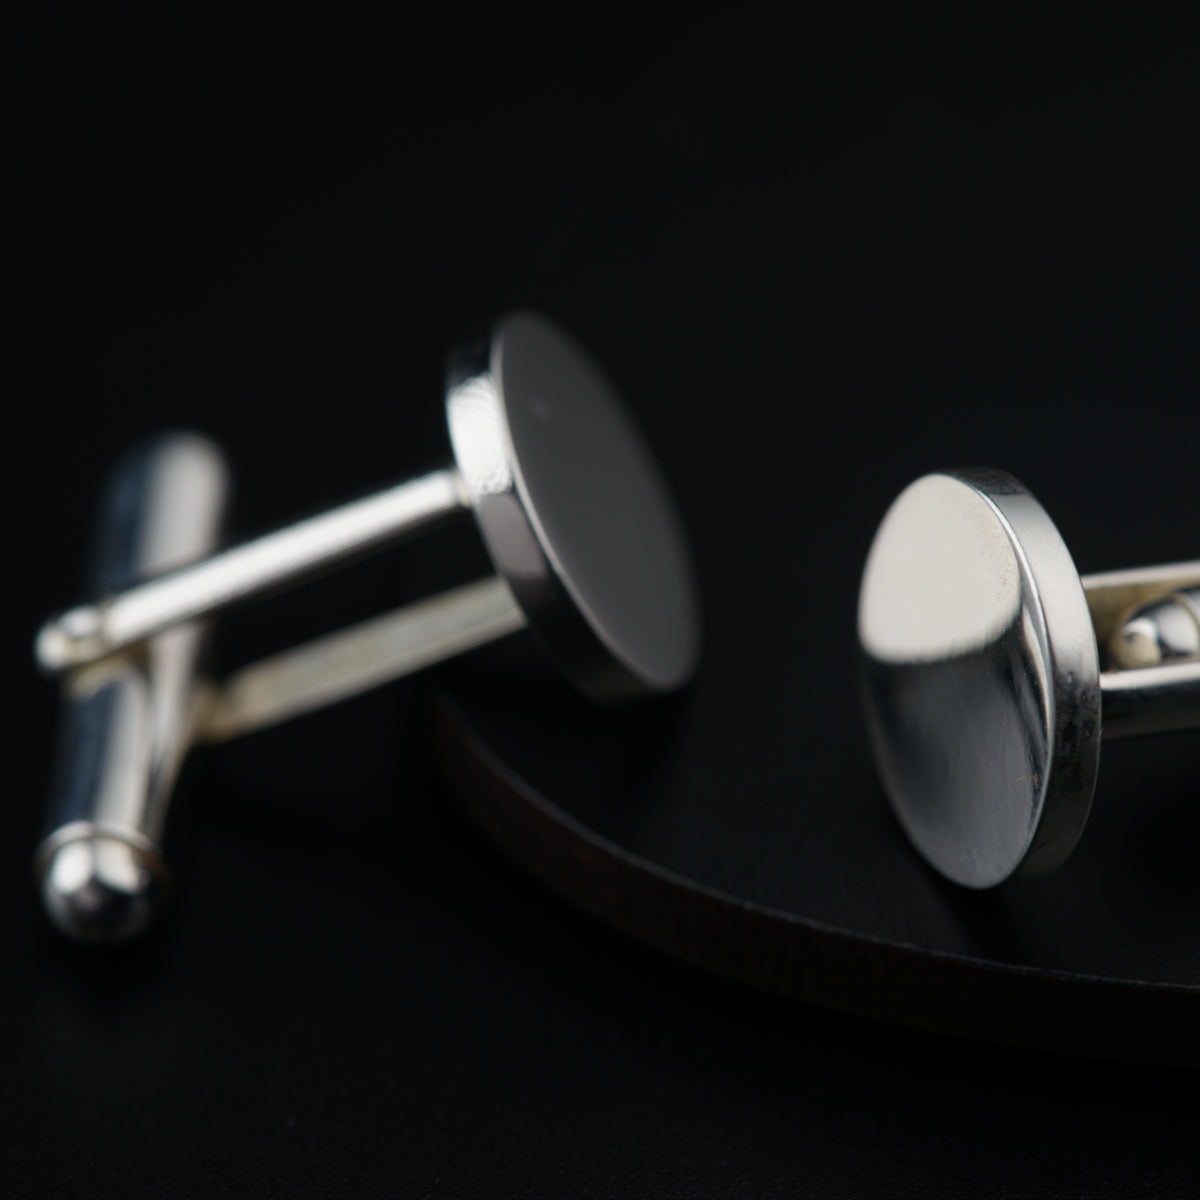 a pair of silver cufflinks on a black surface